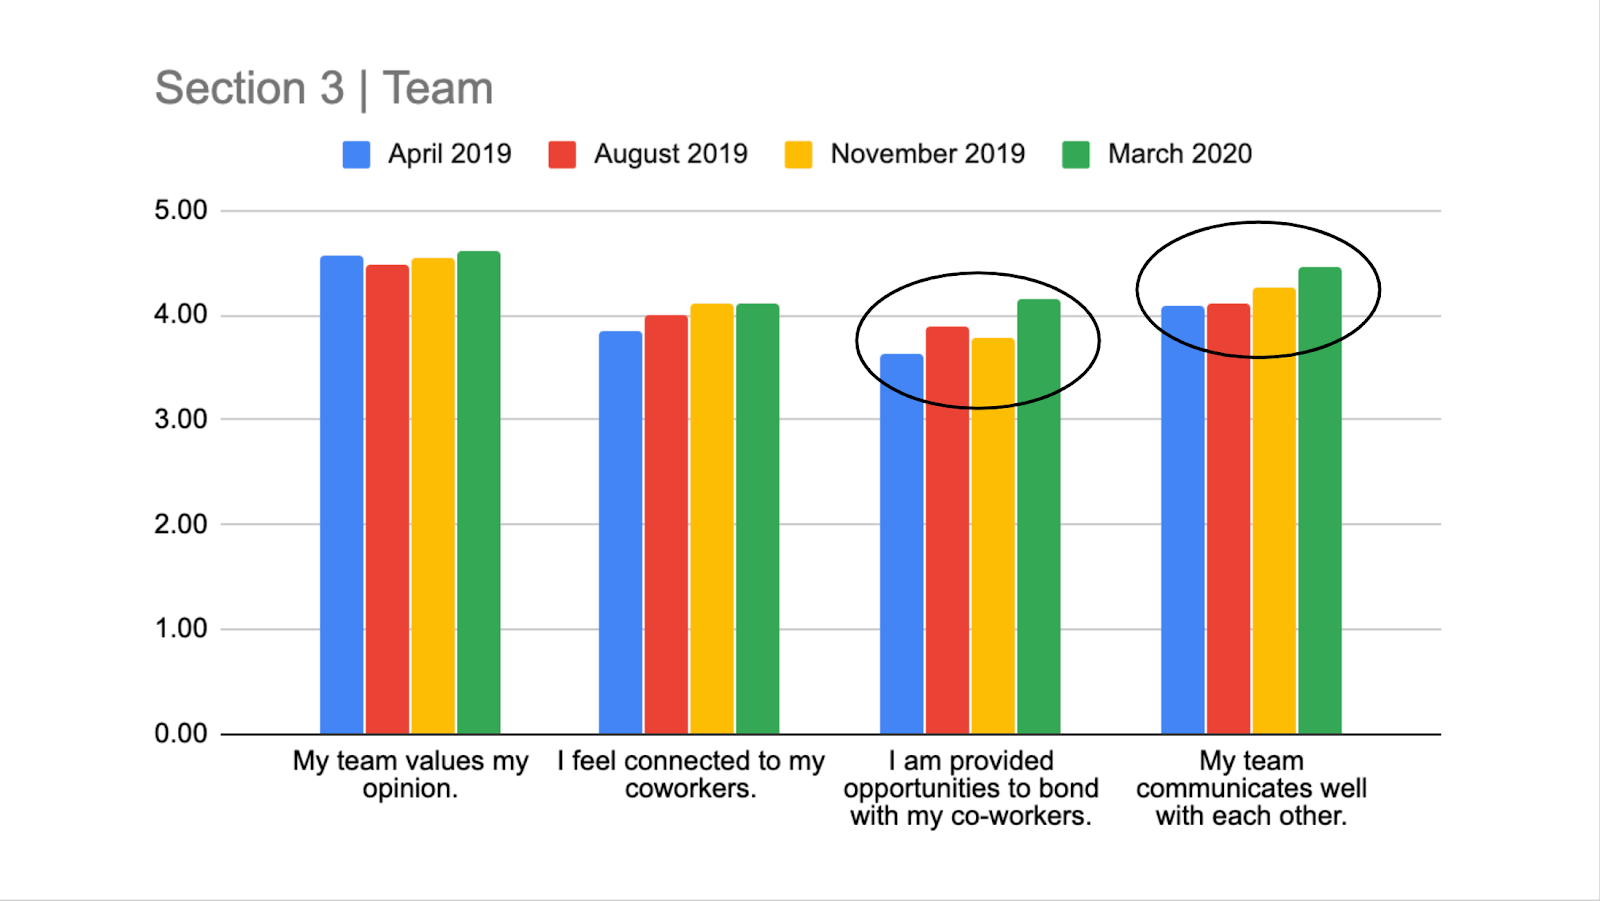 Bar graphs showing quarterly replies from April 2019-March 2020, on various vectors.